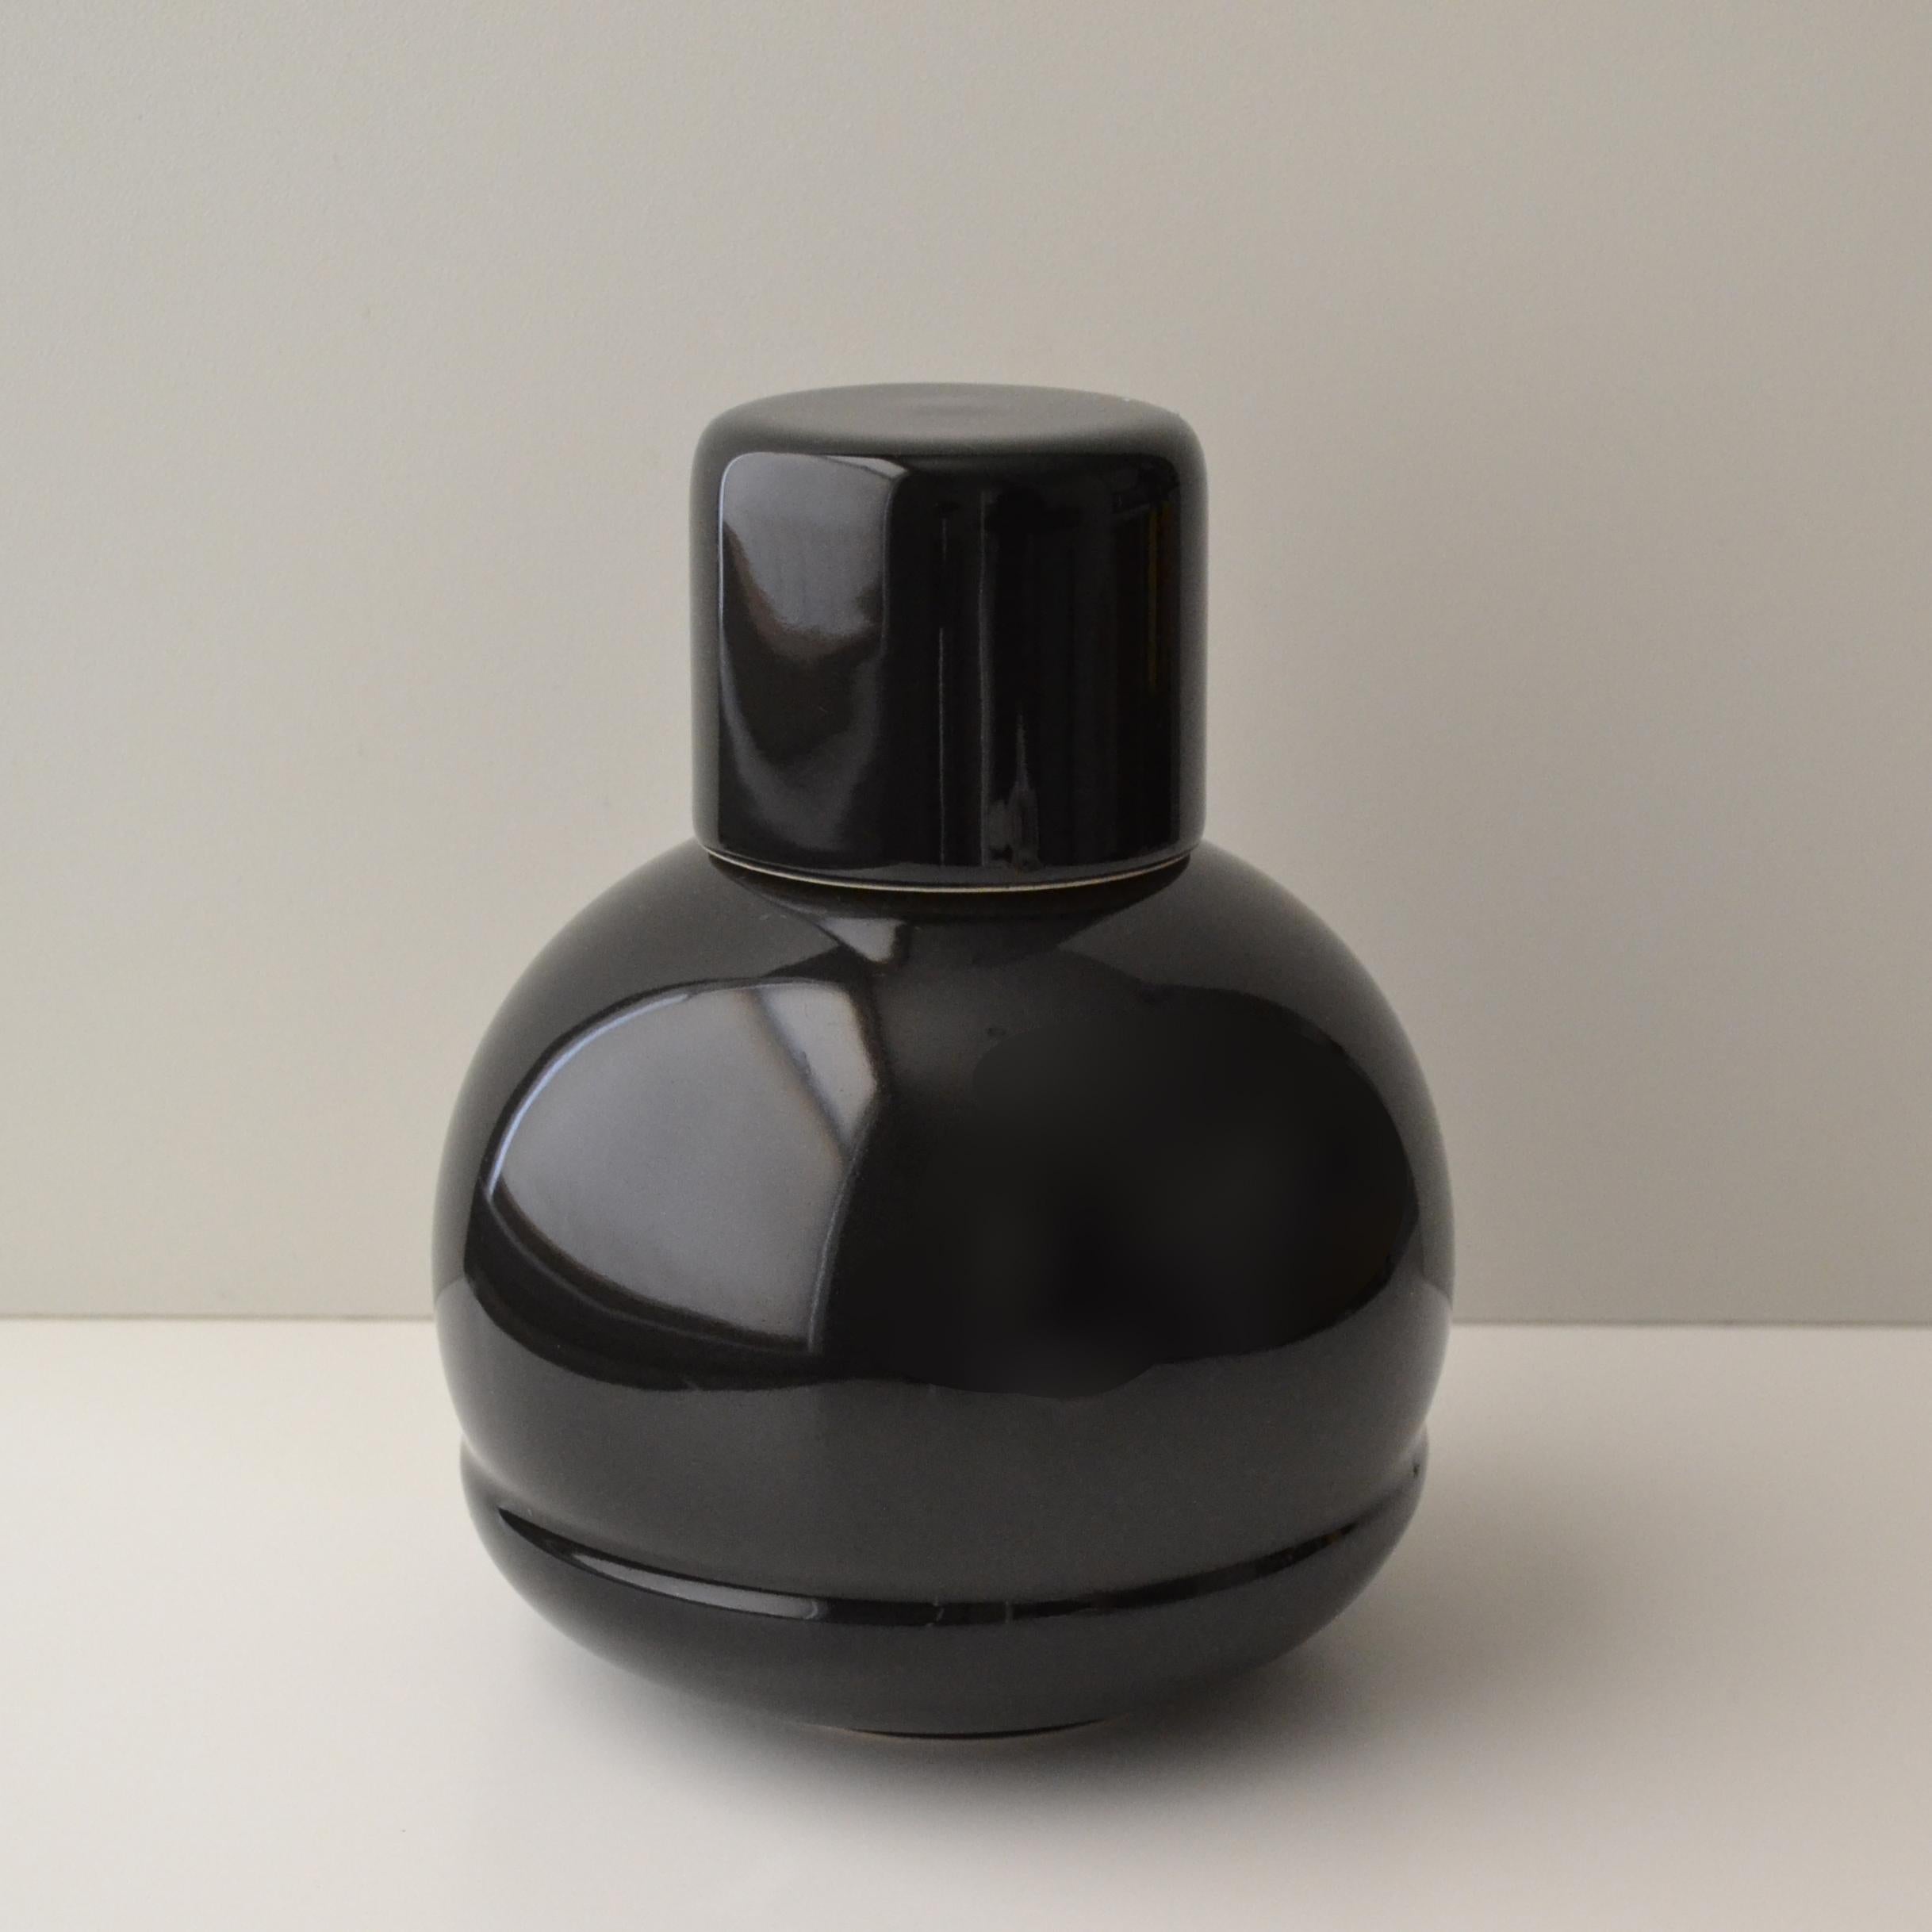 Special Edition Ceramic Carafe and Cups Bright Shine Black Jug Flower Vase Small In New Condition For Sale In London, GB